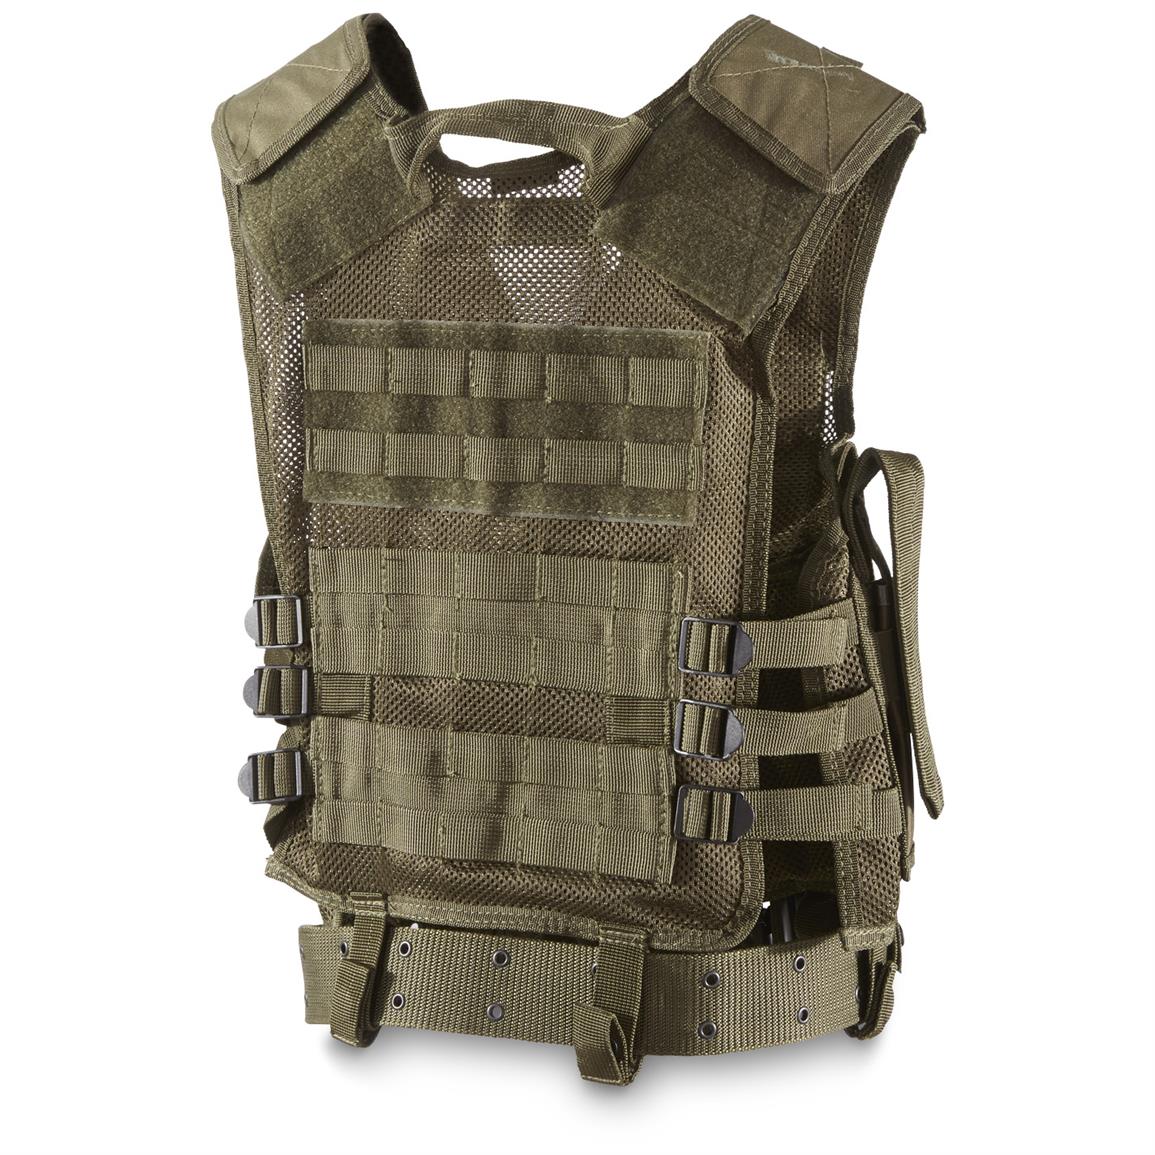 Used British Police-issue Body Armor Vest - 201664, Tactical Clothing ...